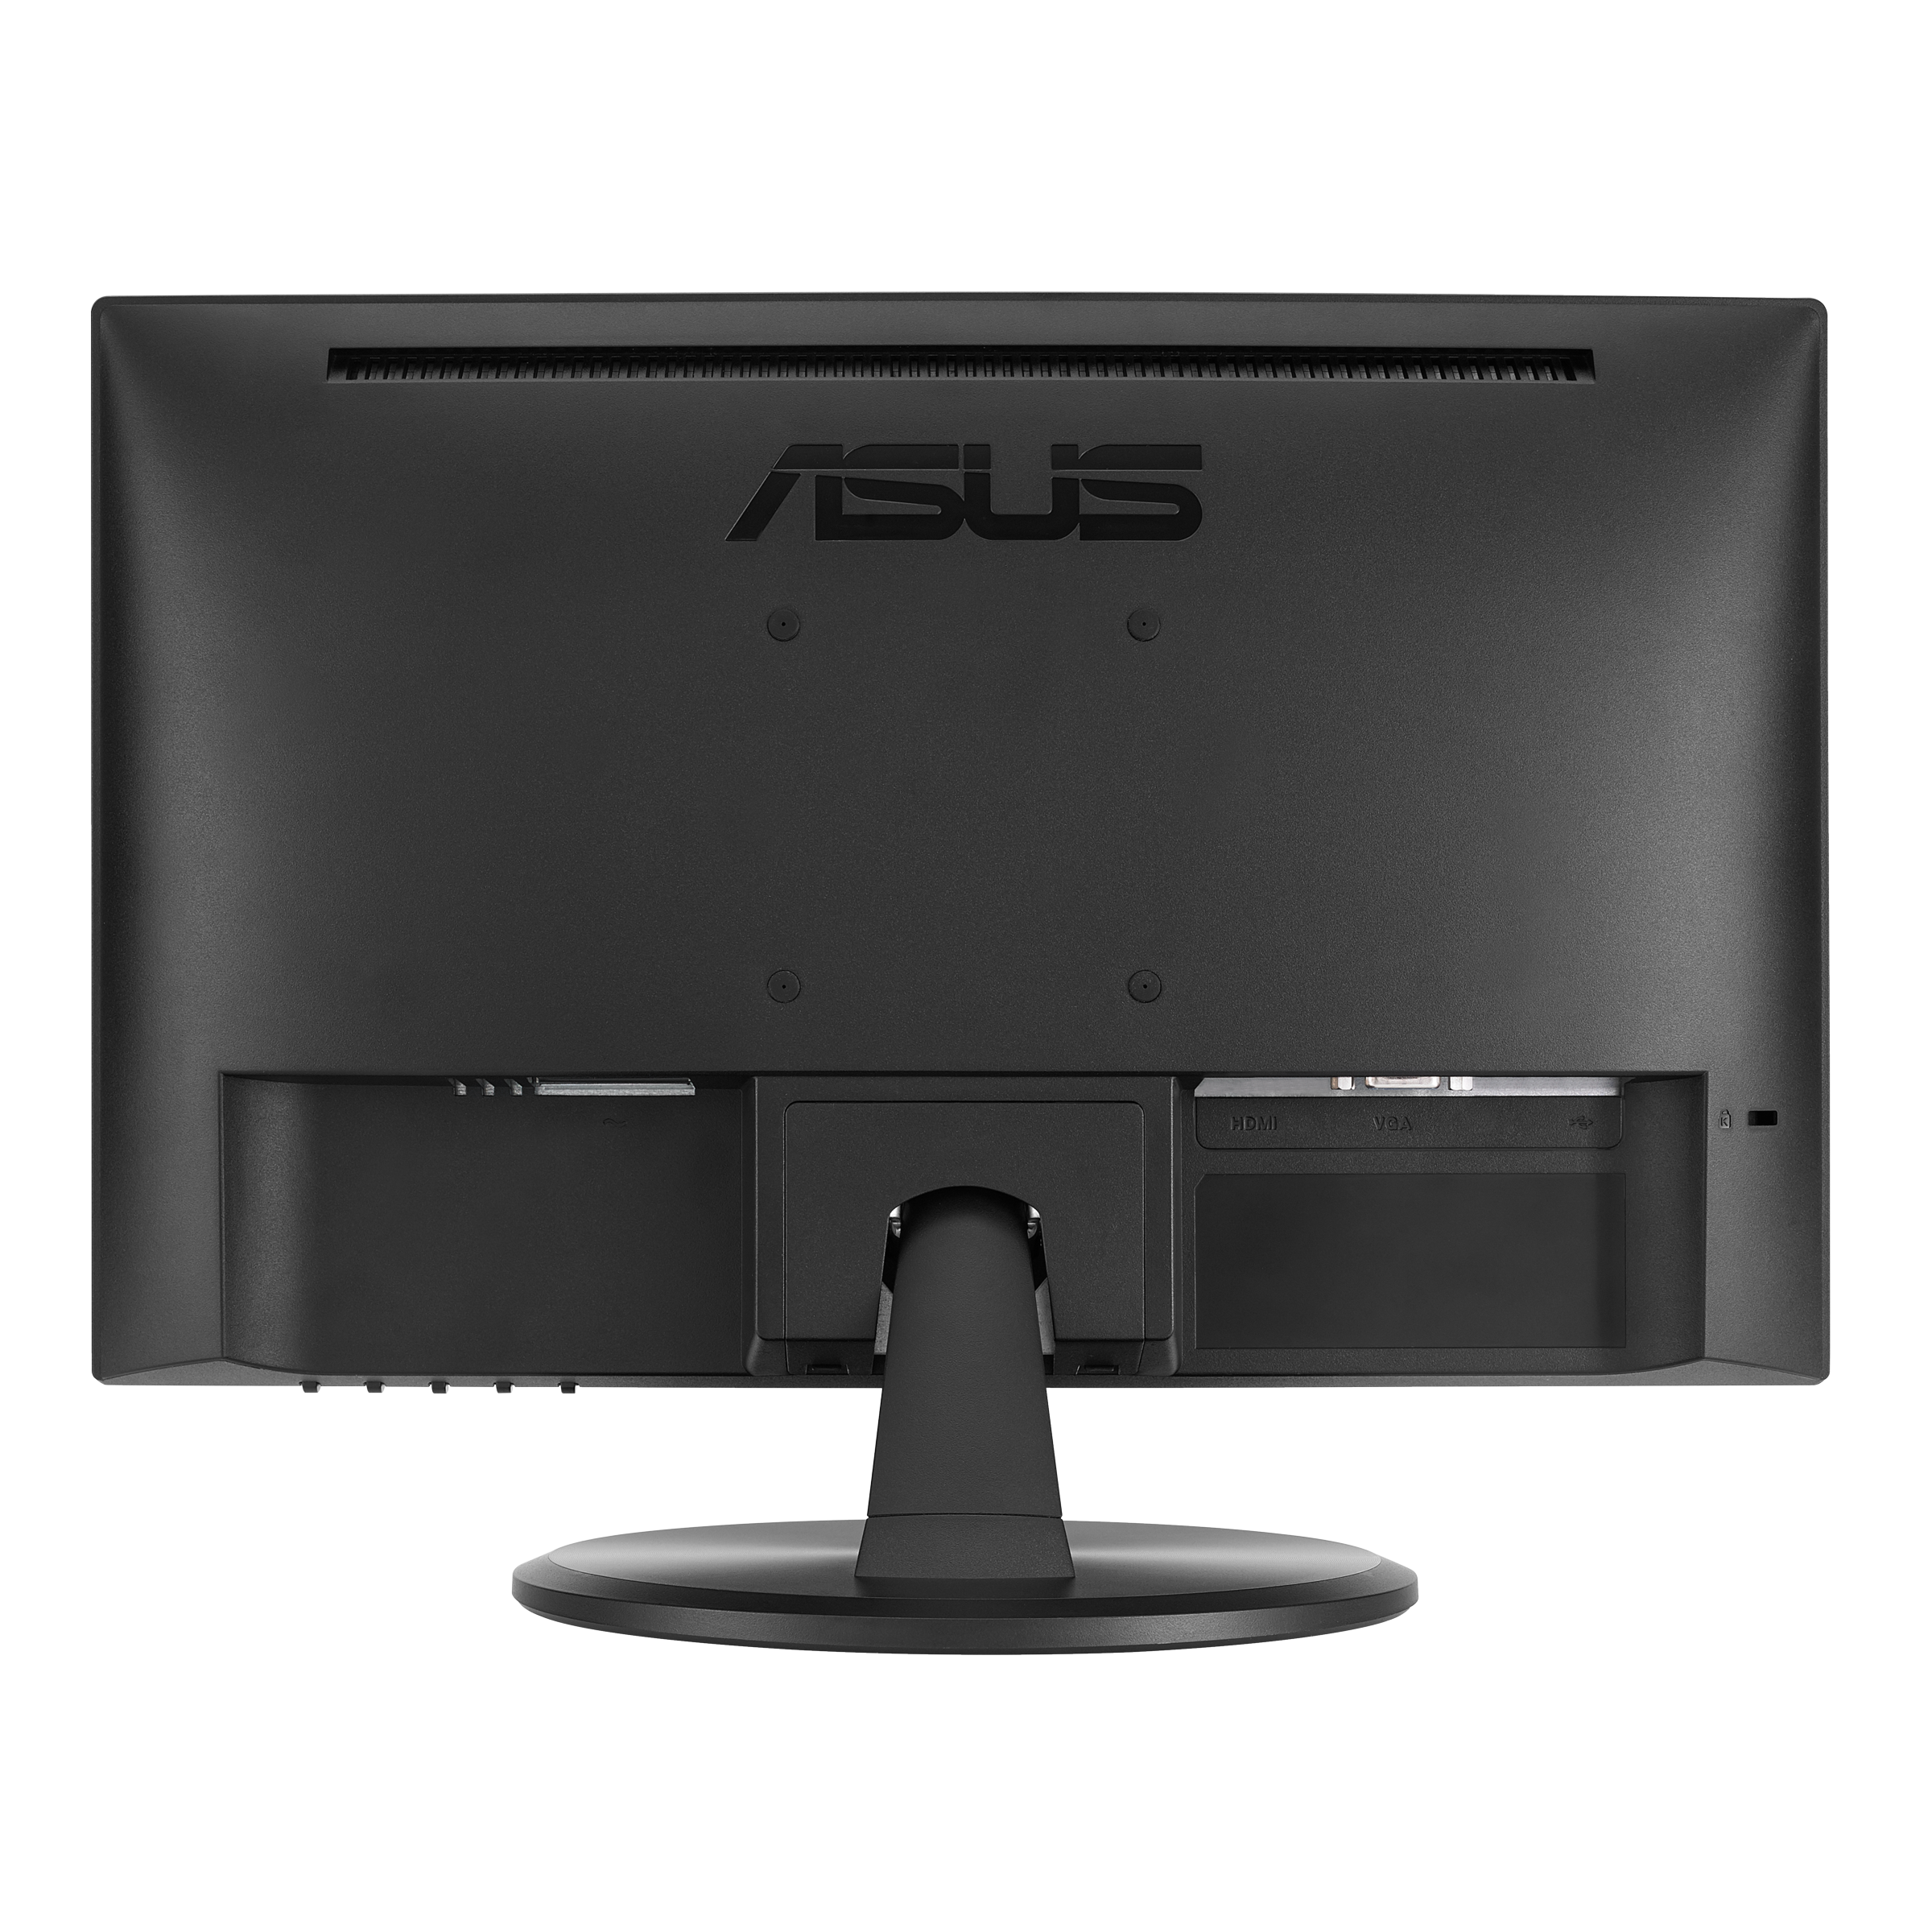 Asus VT168H 15.6" LCD Touchscreen Monitor 16:9 